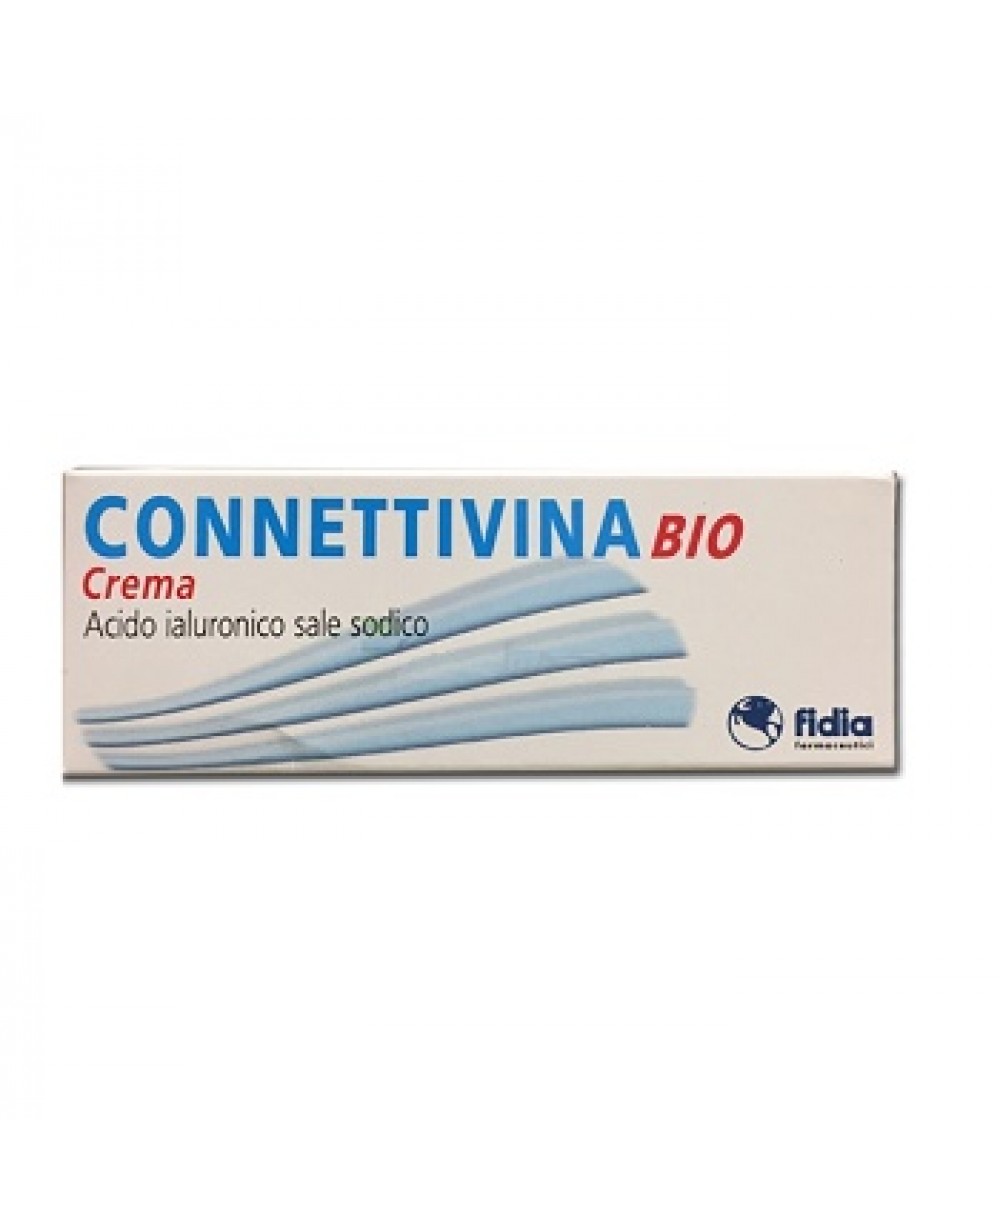 Connettivina : Uses, Side Effects, Interactions, Dosage / Pillintrip